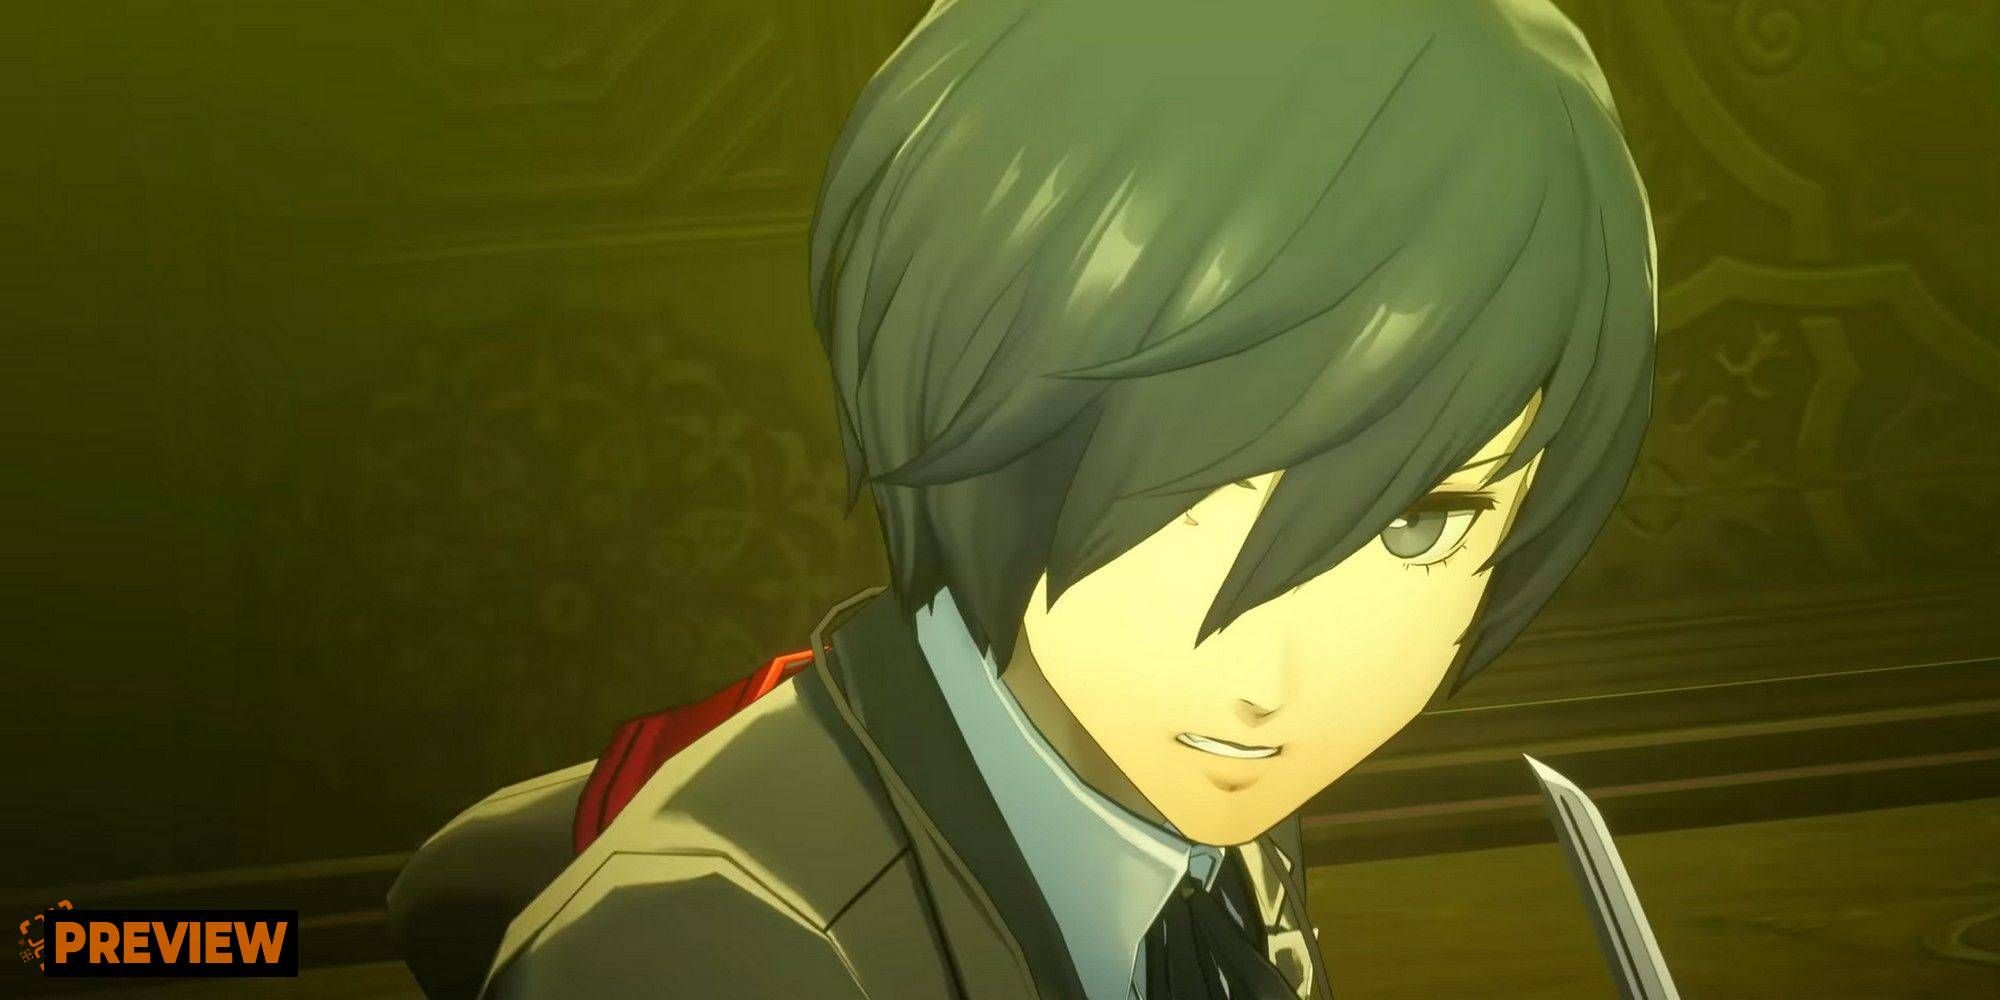 Persona 3 Reload Preview: The Justice Persona 3 Deserves